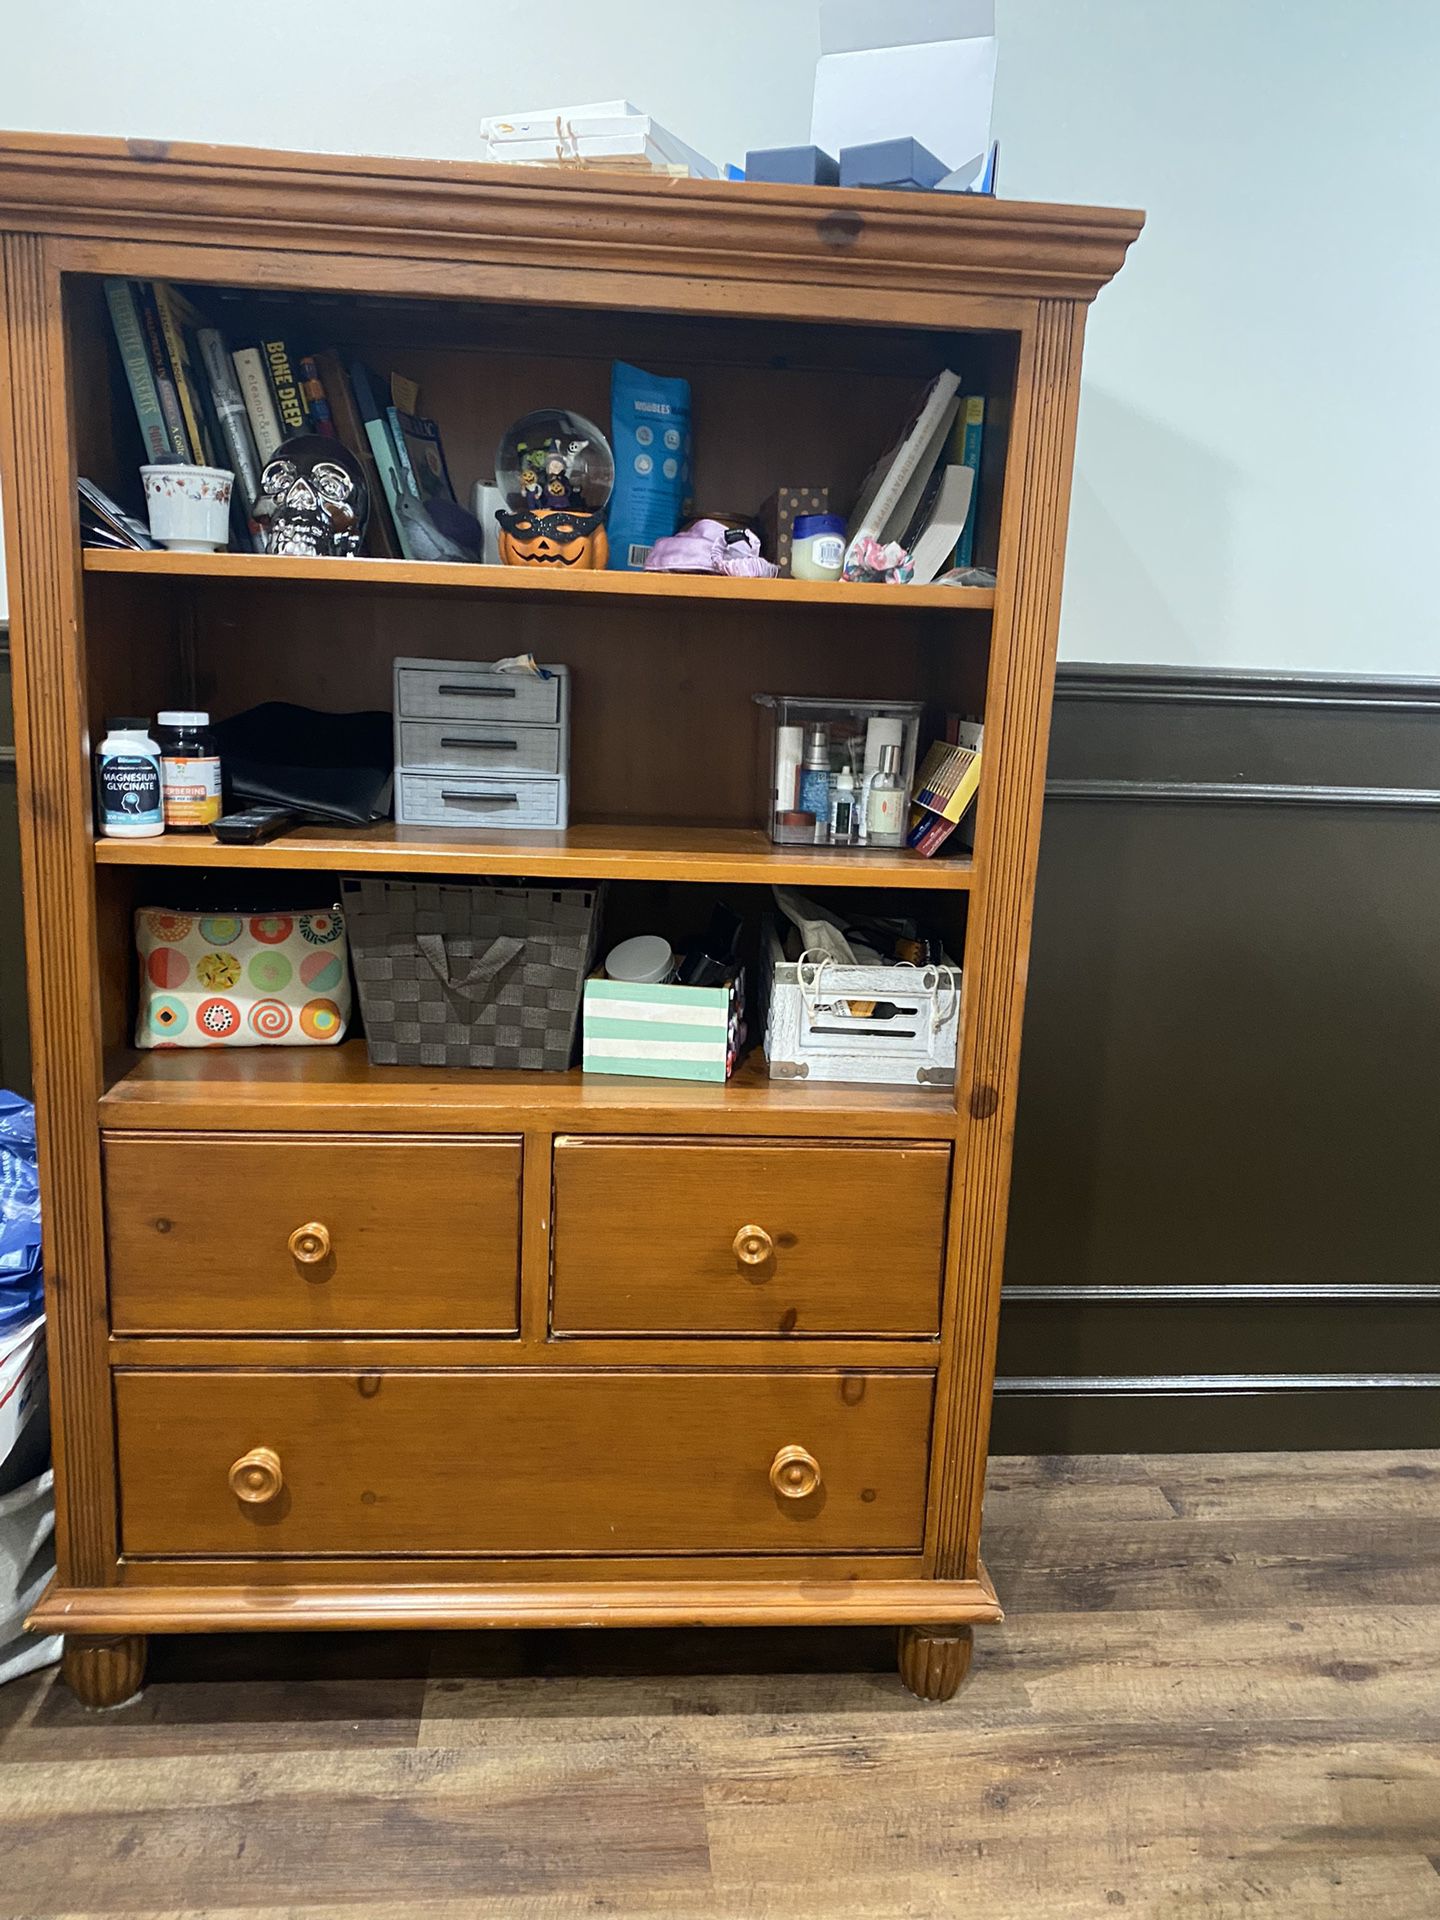 Book Shelf with Drawers (please take it I don’t want it!)